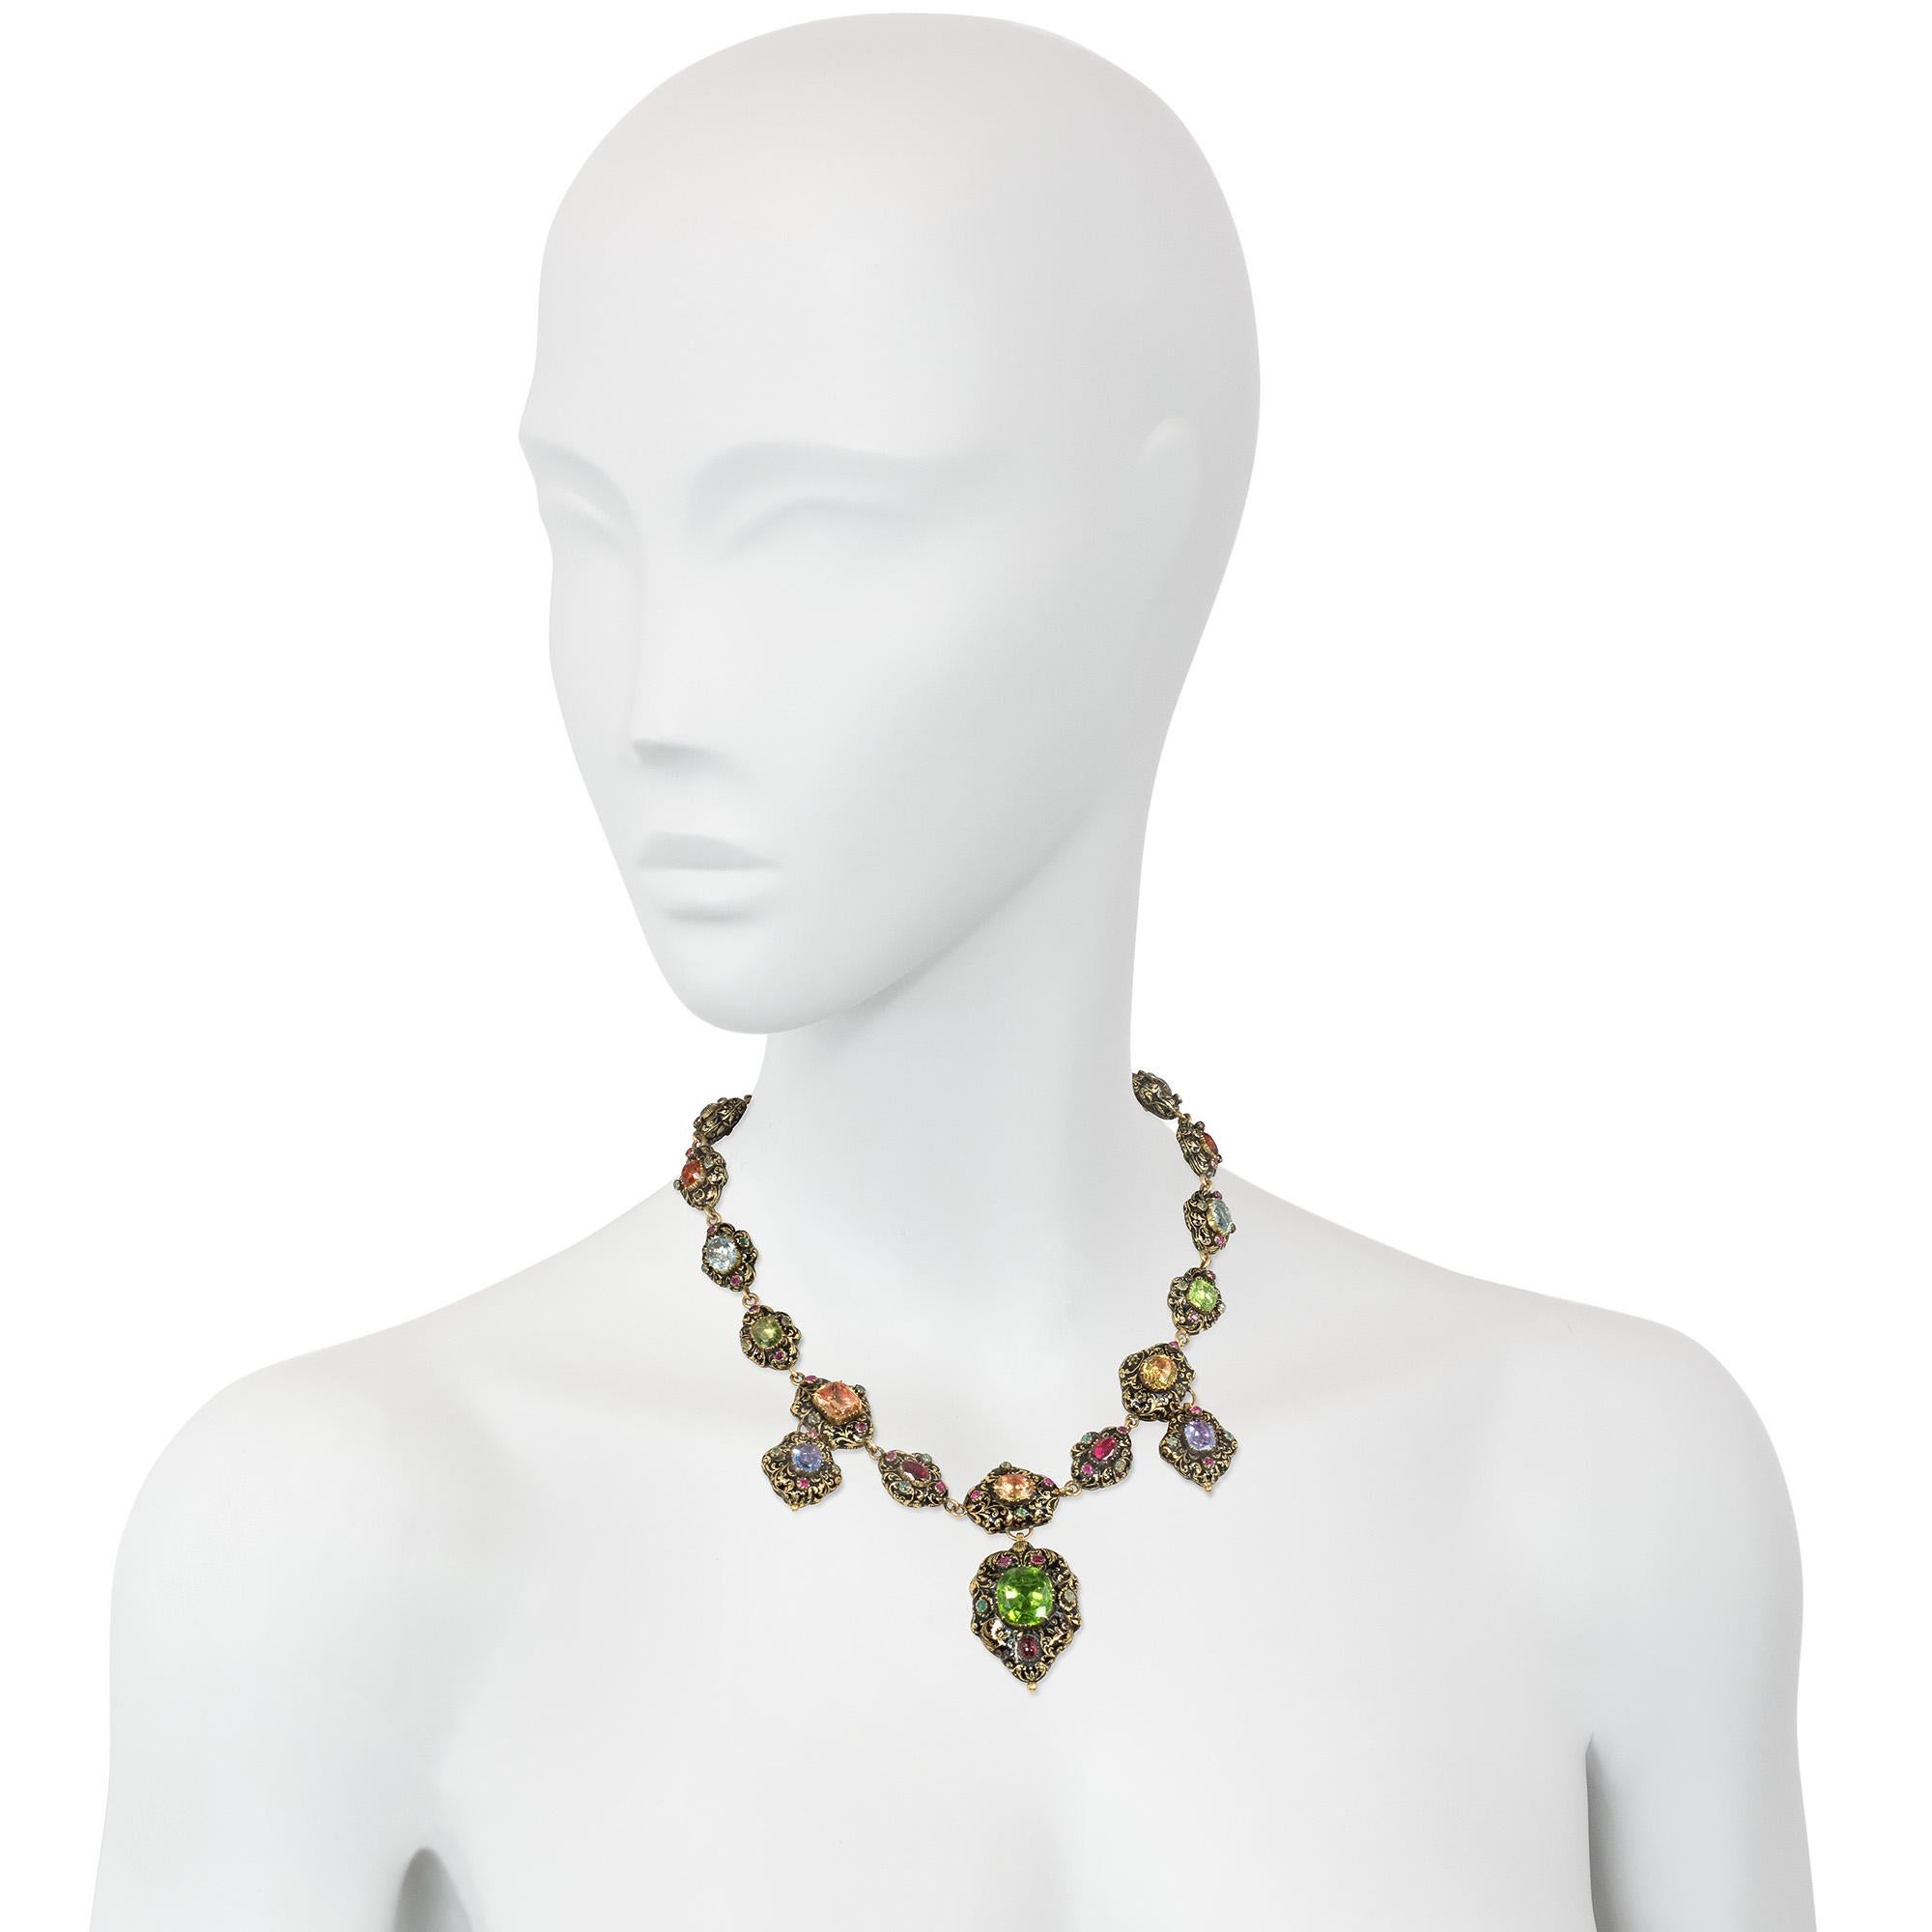 Important Antique Early-19th Century Swiss Enamel, Gold, and Multi-Gem Necklace In Good Condition For Sale In New York, NY